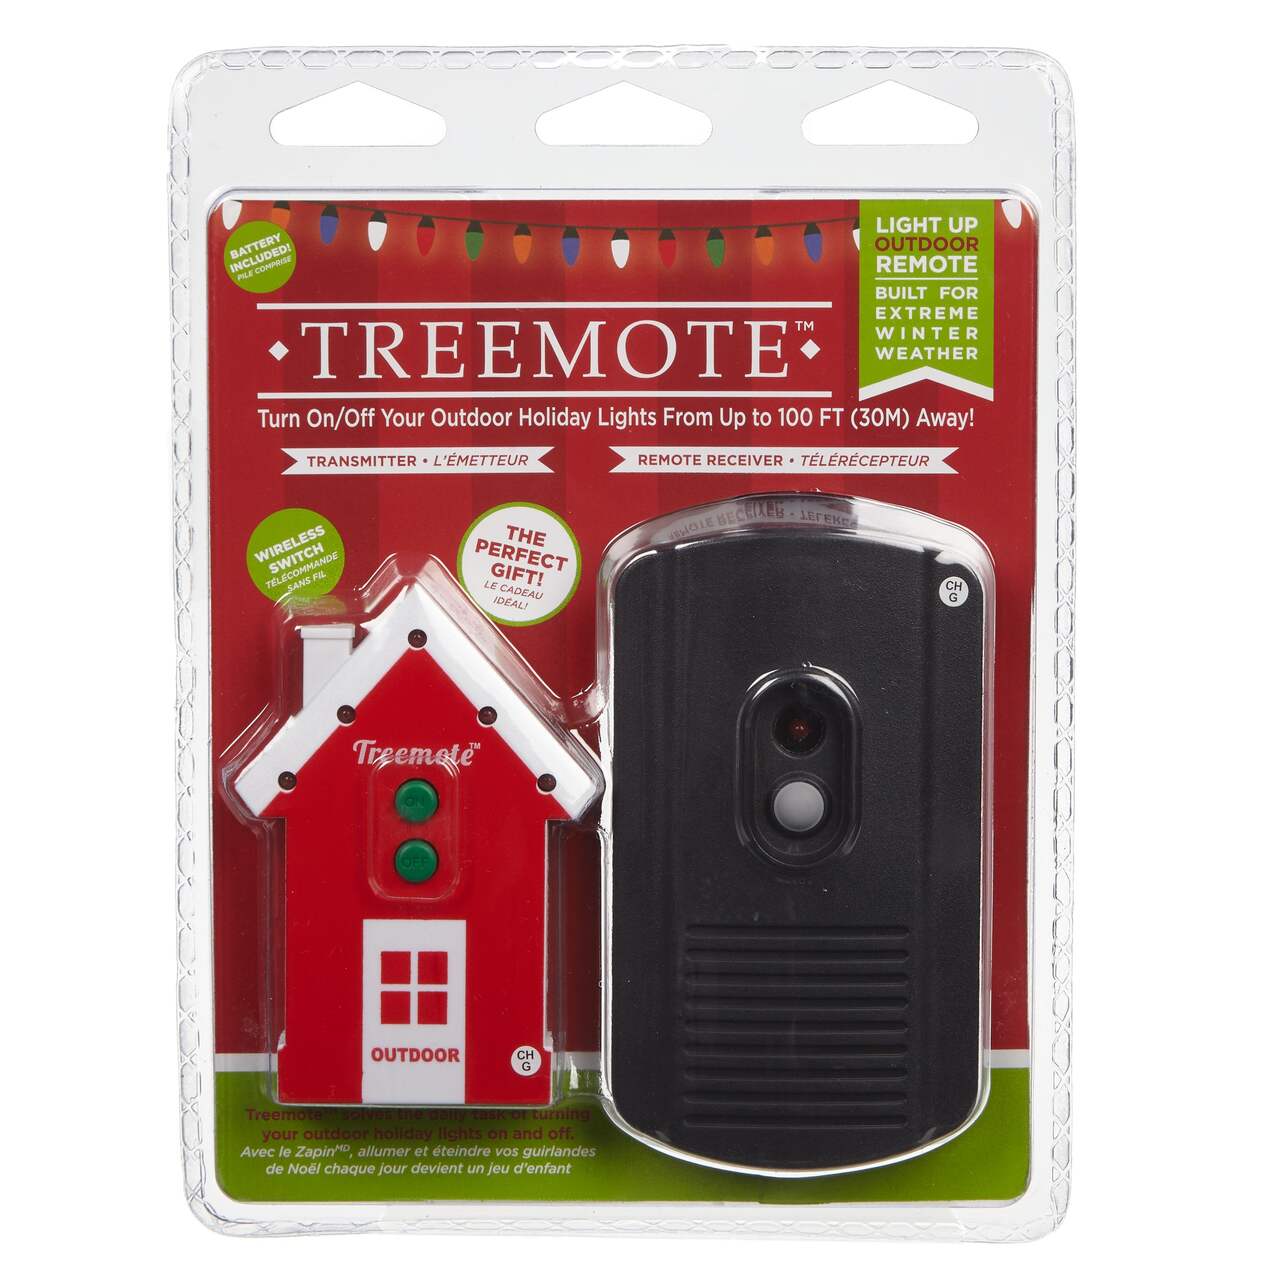  Treemote Wireless Remote Switch for Christmas Tree and Other  Lights, Works Up to 100 Feet Away, Battery Included (Plastic Protective  Cover Over Battery Must BE Removed Before Operating) : Home 